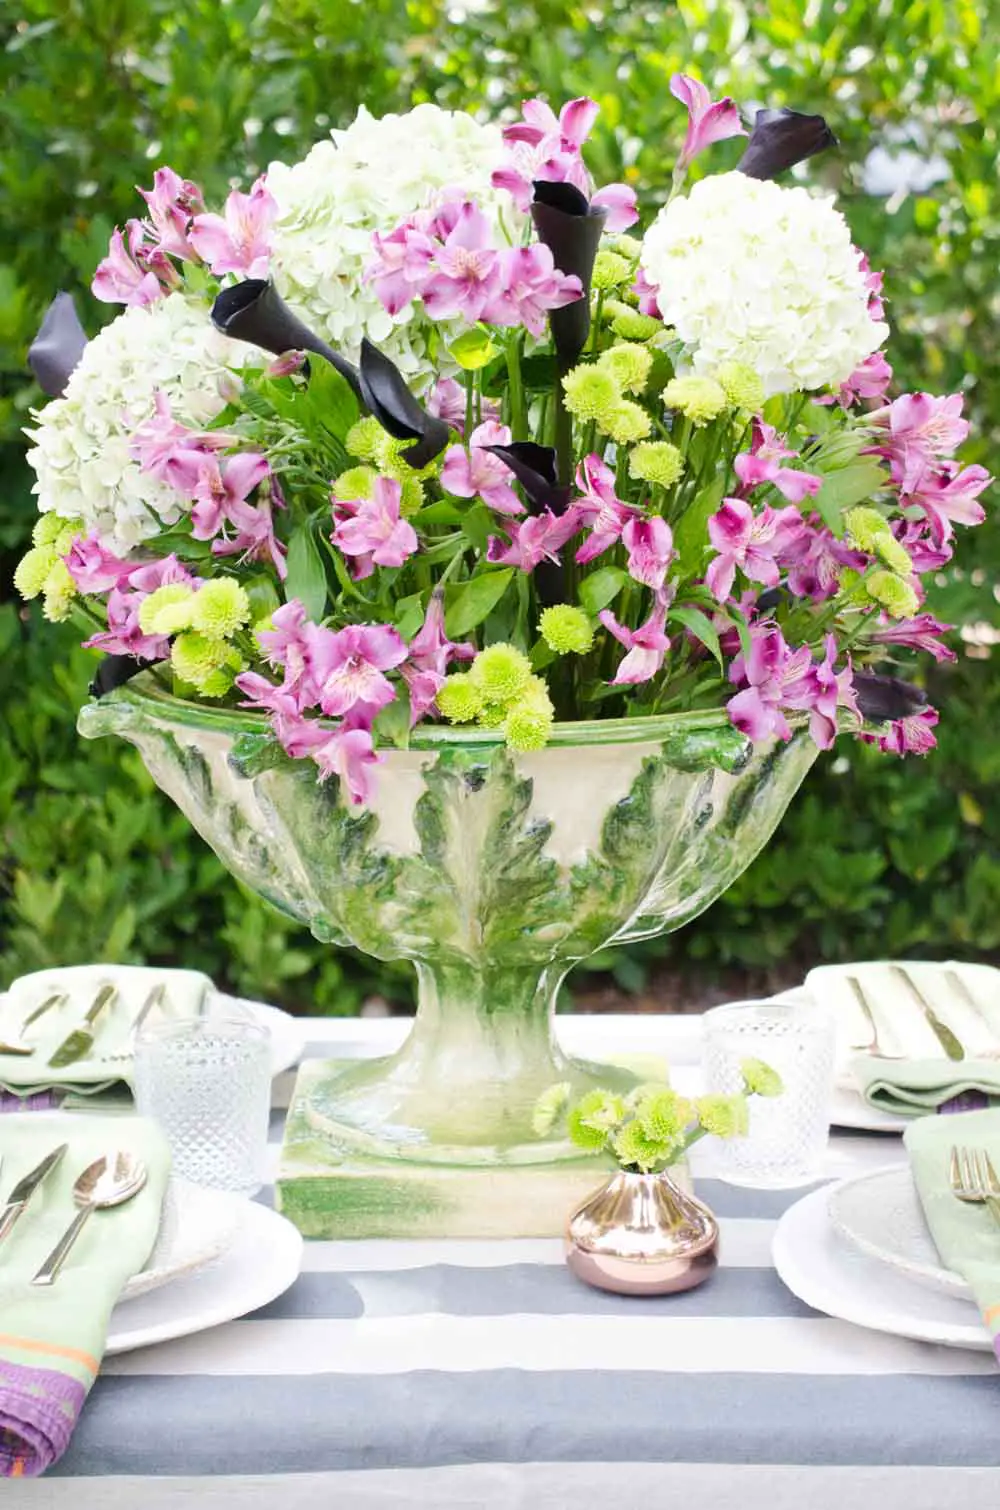 Purple and green fall table setting on @thouswellblog